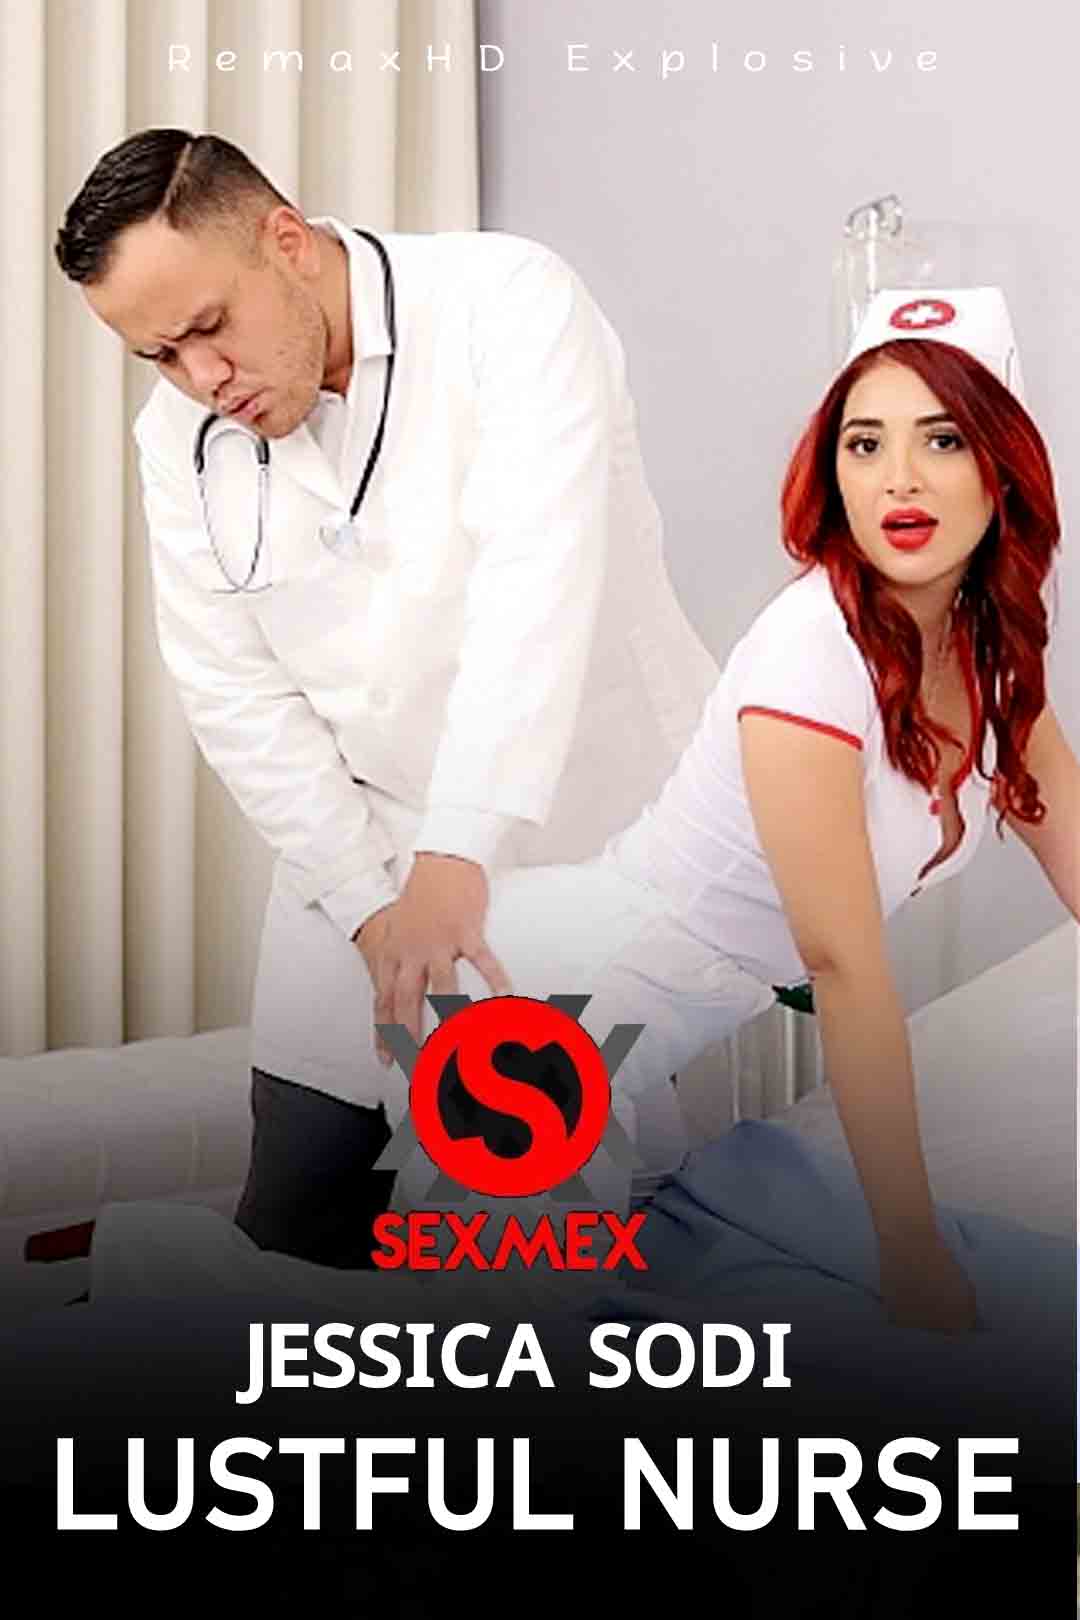 You are currently viewing Jessica Sodi Lustful Nurse 2022 SexMex Adult Video 720p 480p HDRip 188MB 70MB Download & Watch Online